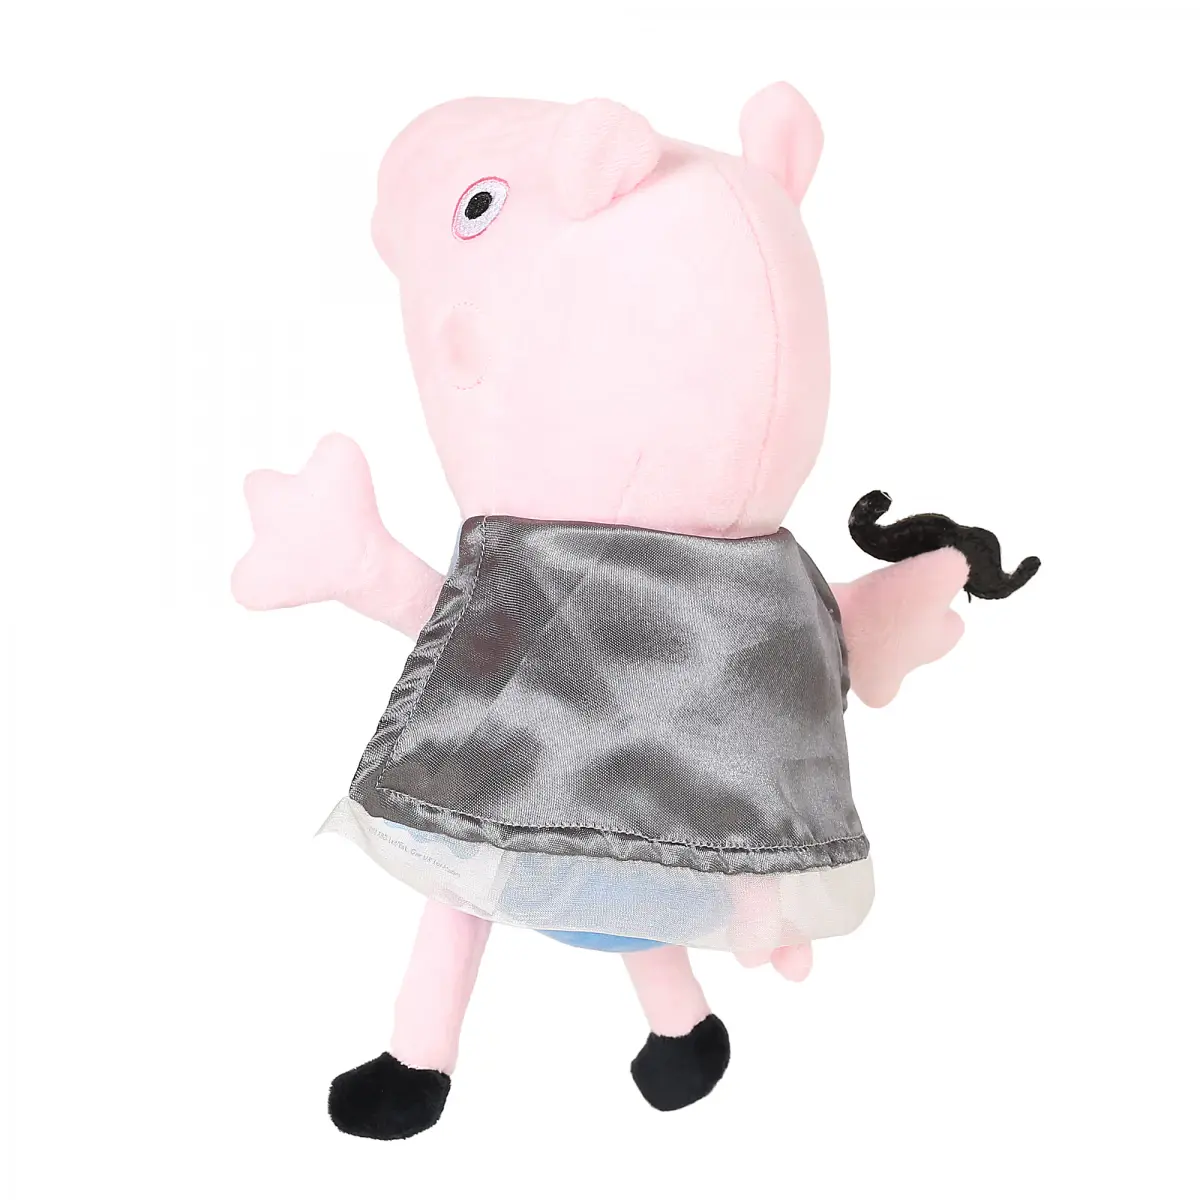 Peppa Pig Soft Toys for Kids, George with Bolt, 30cm, 18M+, Multicolour